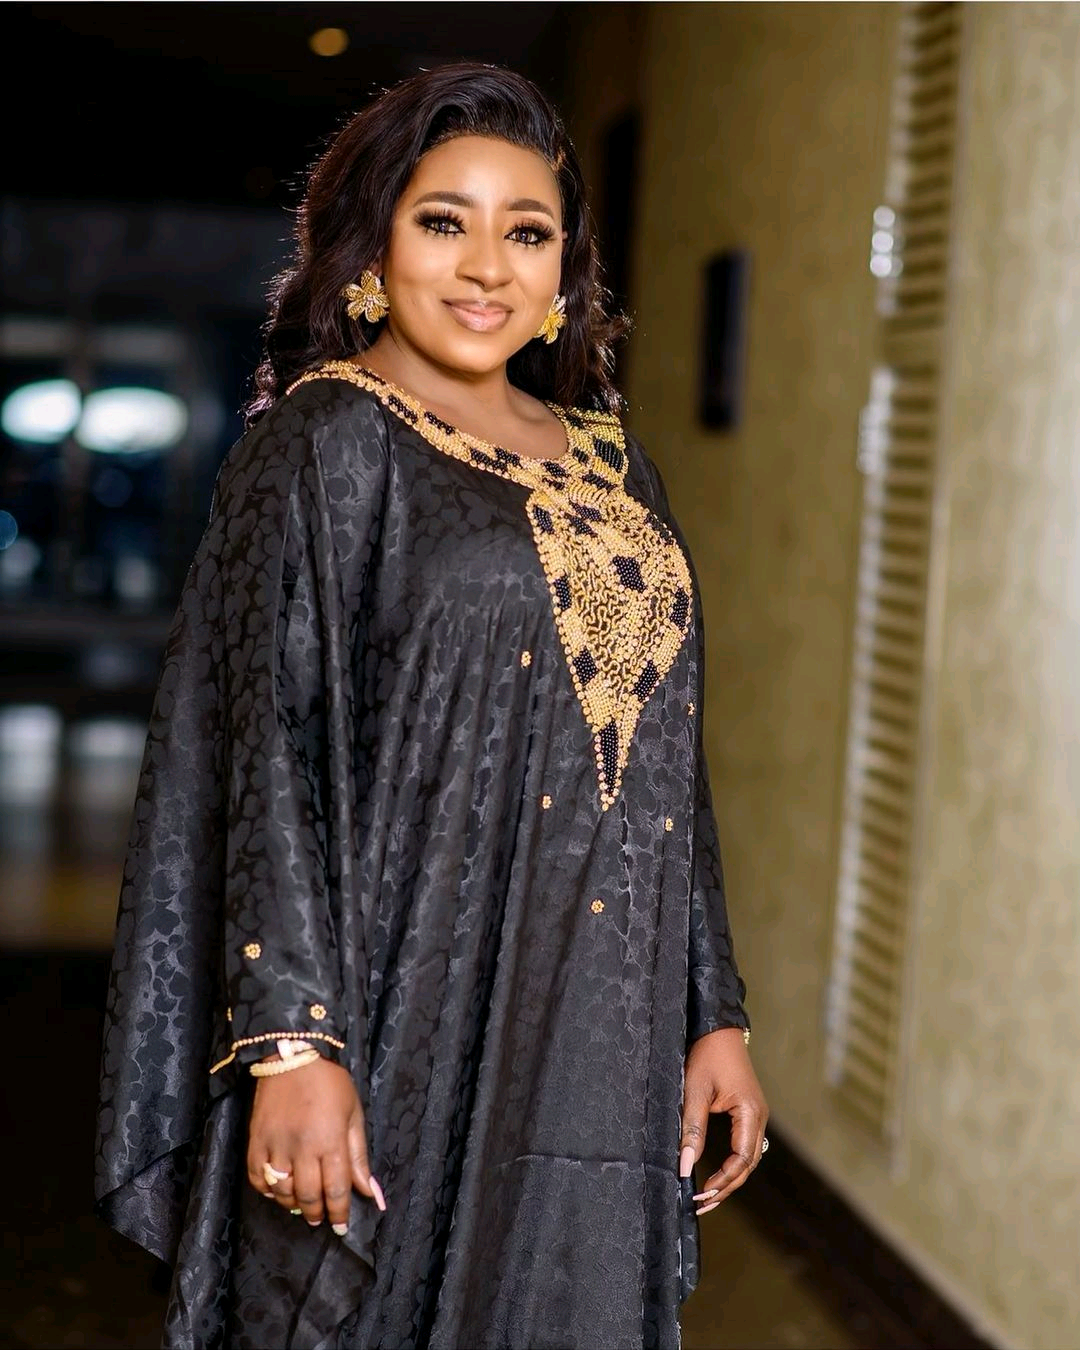 I Celebrate My Mum Yearly But I Don't Make Noise About It - Actress Mide Martins